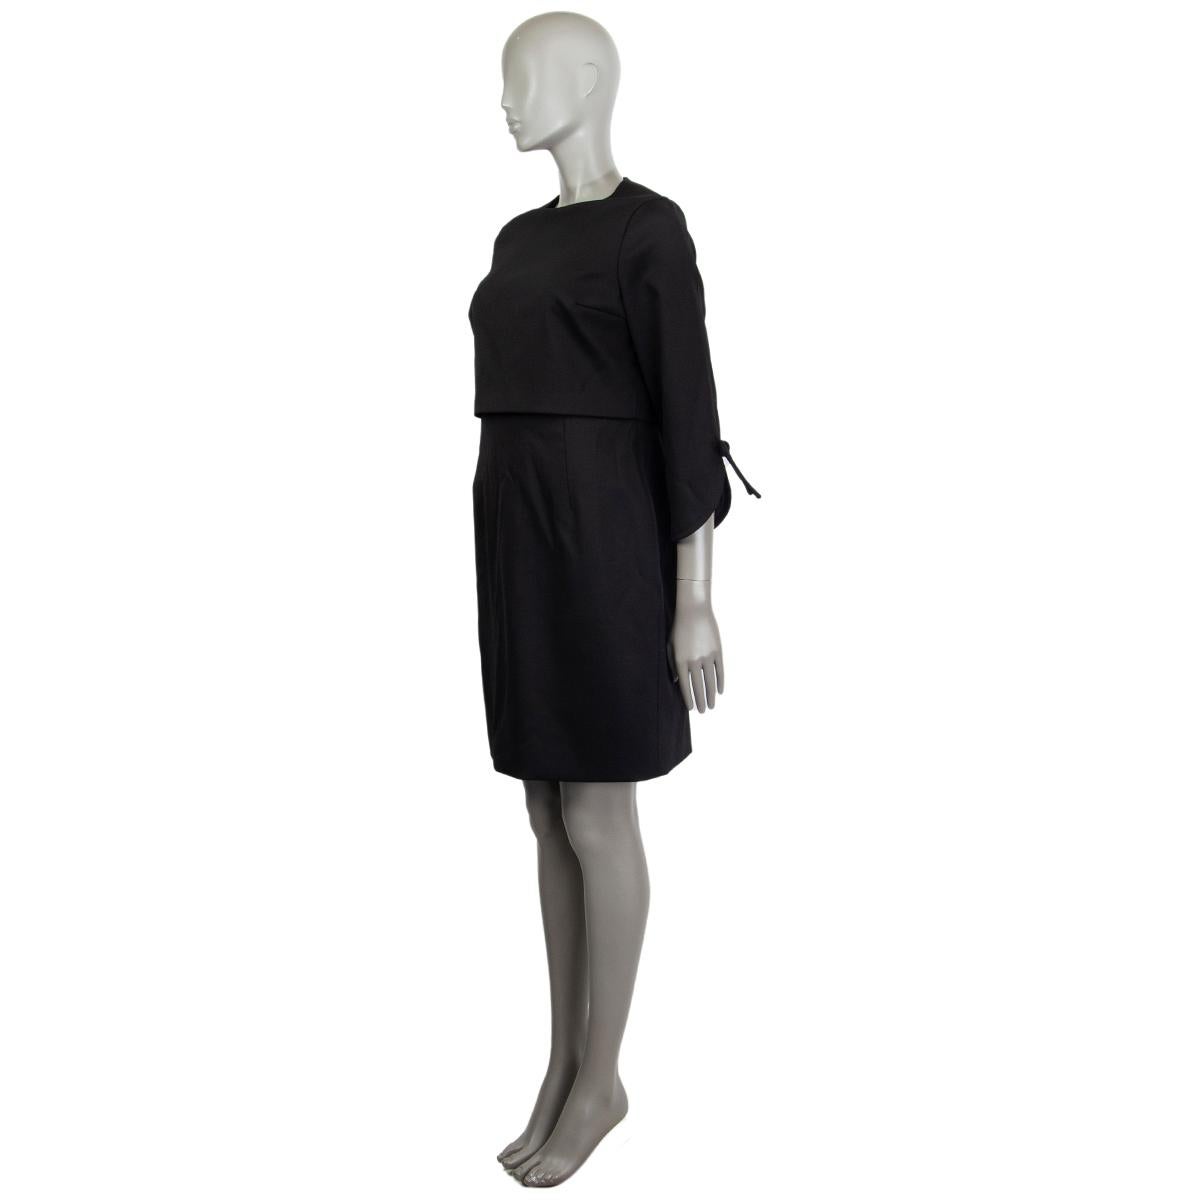 Valentino Techno Couture sheath dress in black missing tag (probably wool blend) with a crop top, round neckline, knee-length, 3/4 arm length detailed with a slit and ribbon on the outside. Lined in black fabric missing tag. Closes with a concealed